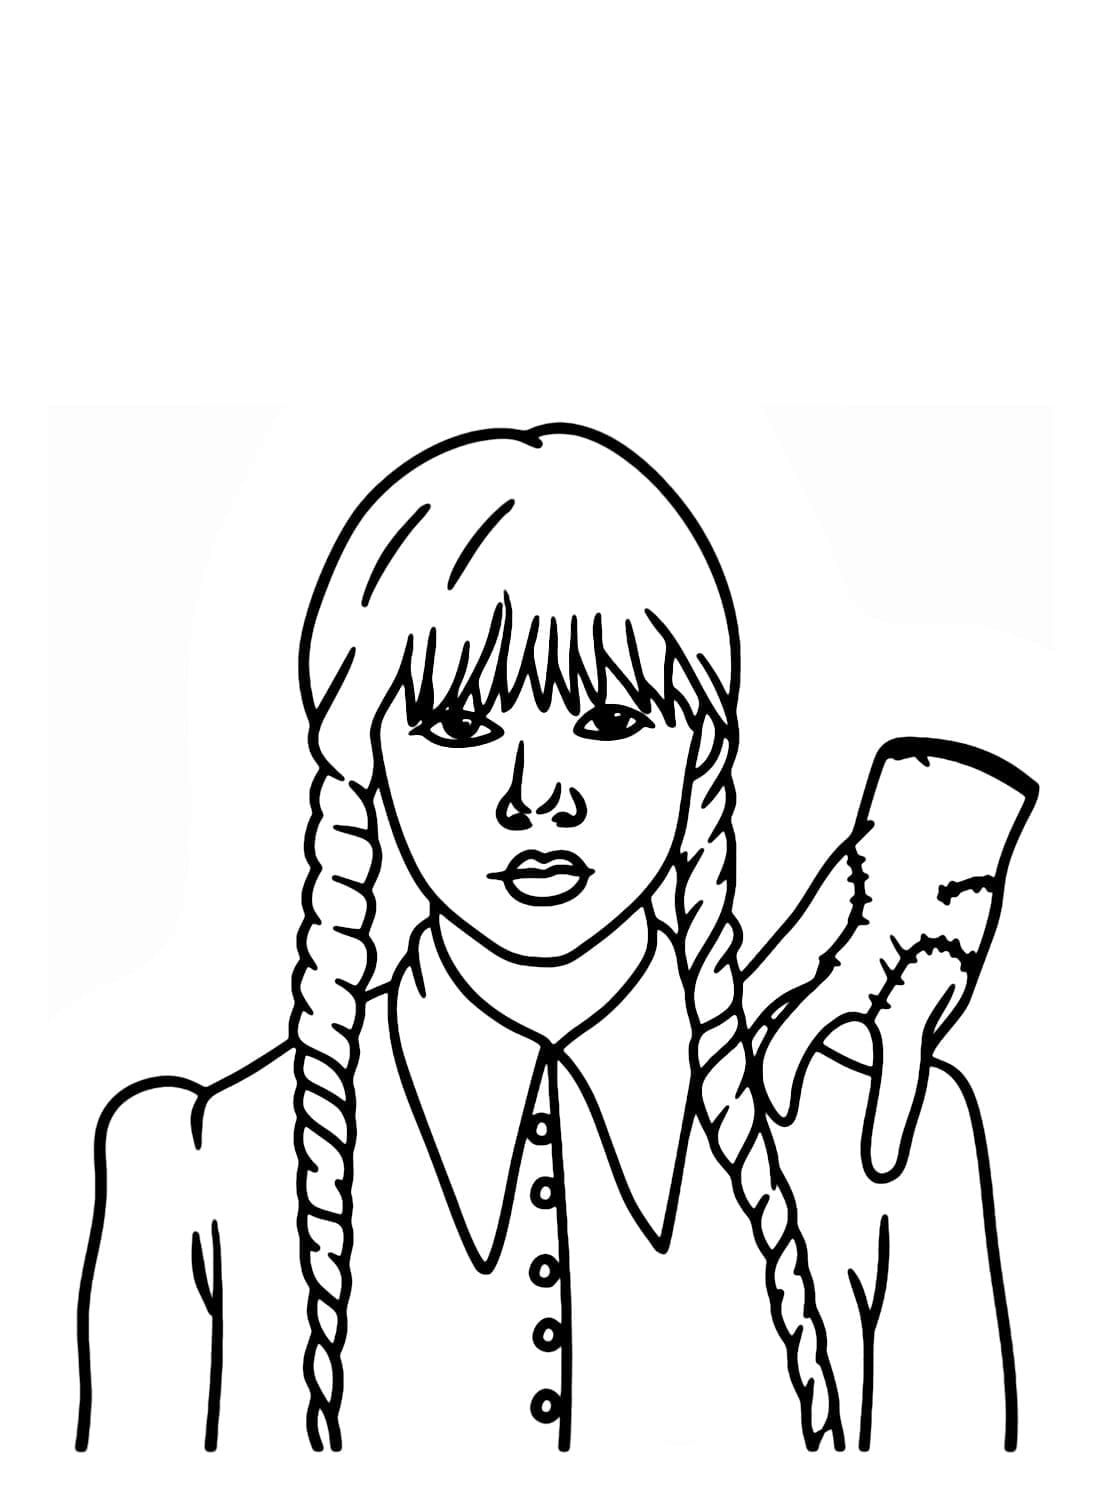 Wednesday addams coloring pages